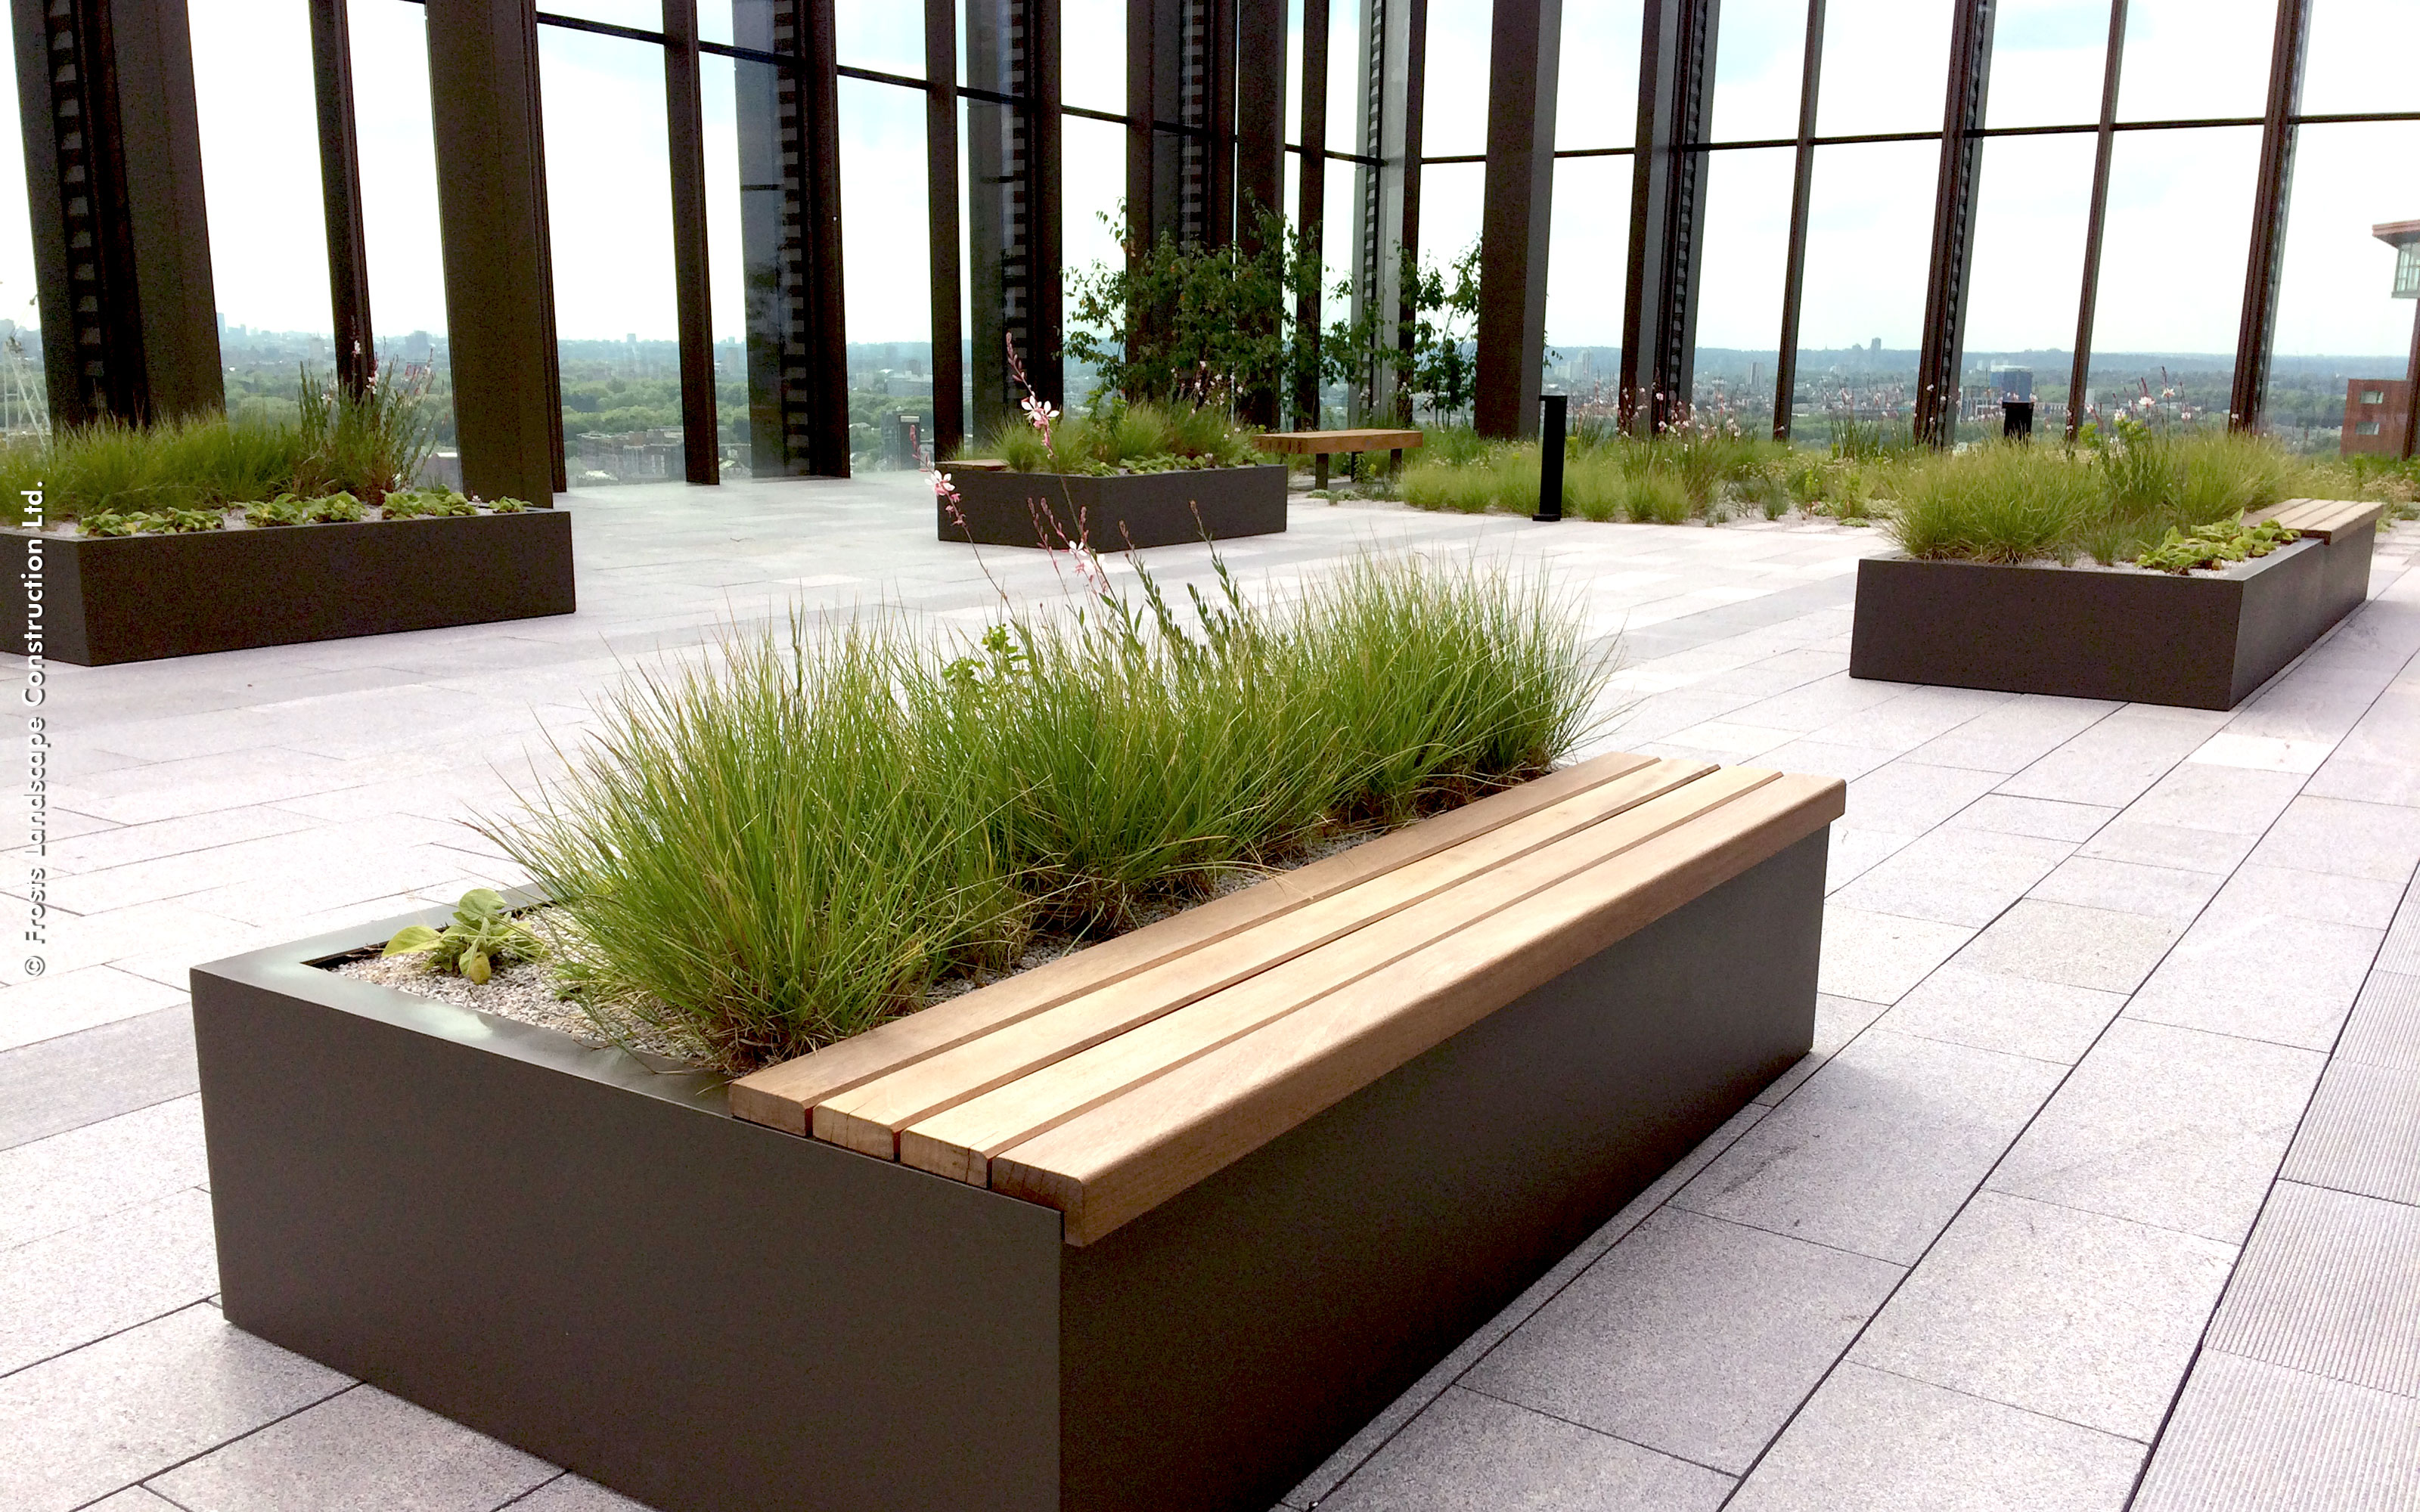 Paved roof terrace with wooden raised plant beds with seating area